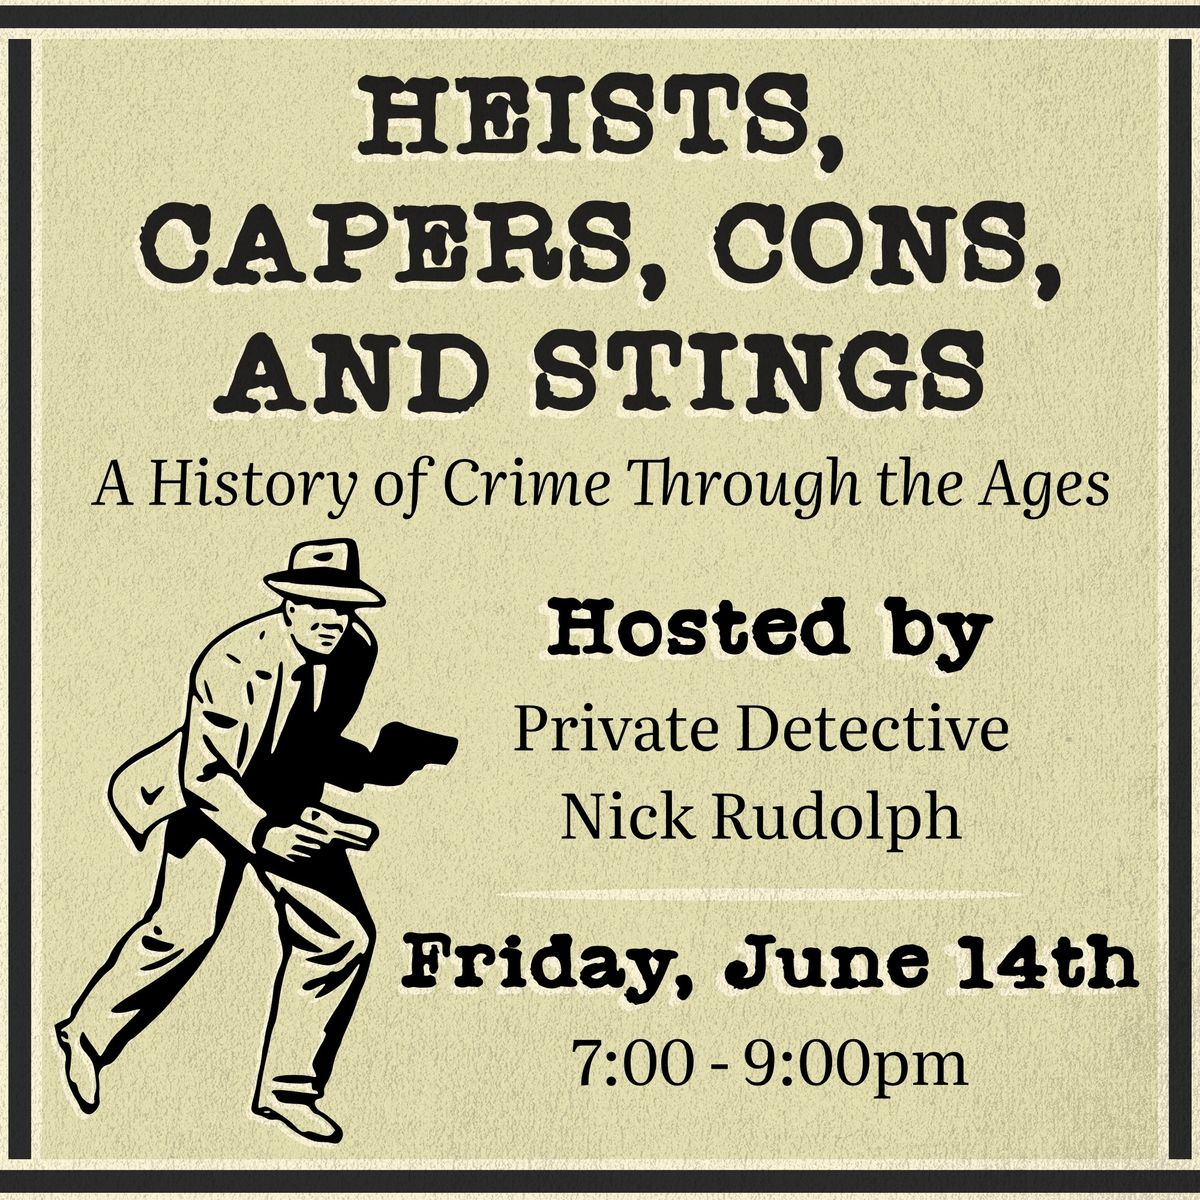 Heists, Capers, Cons, and Stings